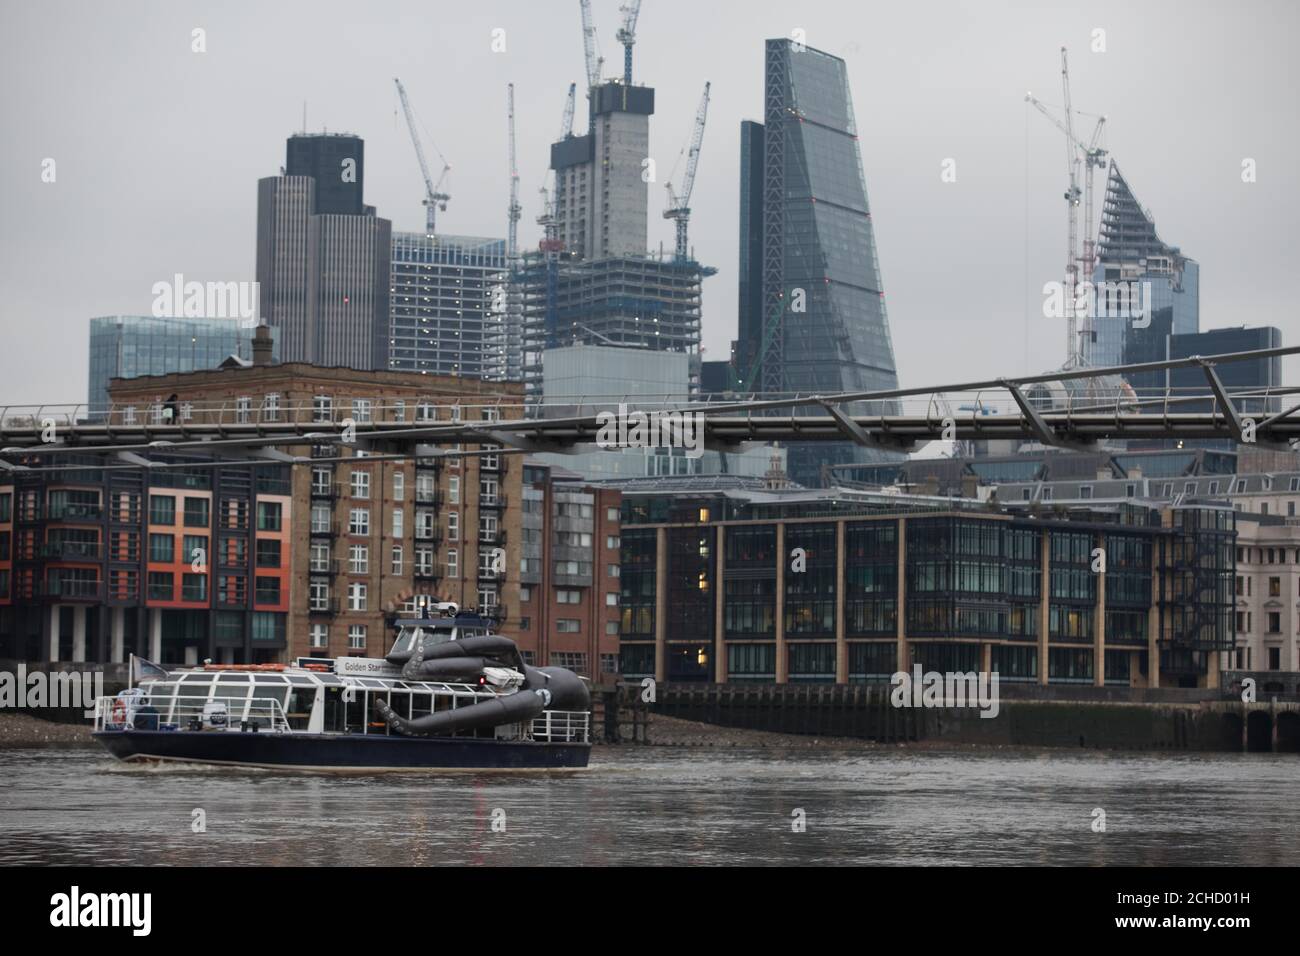 A 'giant sea creature' that has attached itself to the Golden Star passenger boat on the Thames in central London, as Kraken Rum ask the public to register sightings with videos and photos using hashtag #ReleaseTheKraken. Stock Photo